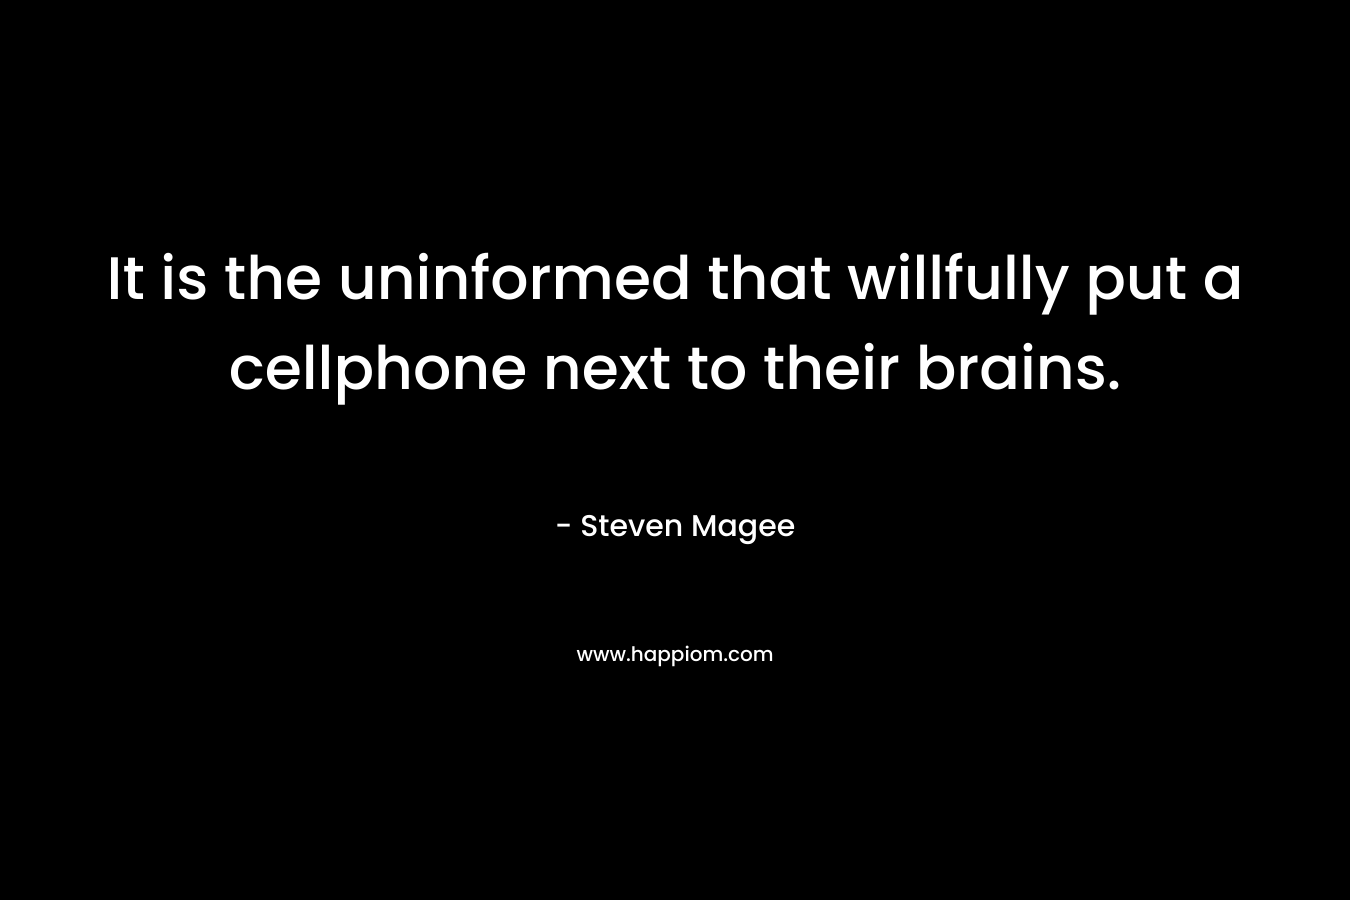 It is the uninformed that willfully put a cellphone next to their brains.